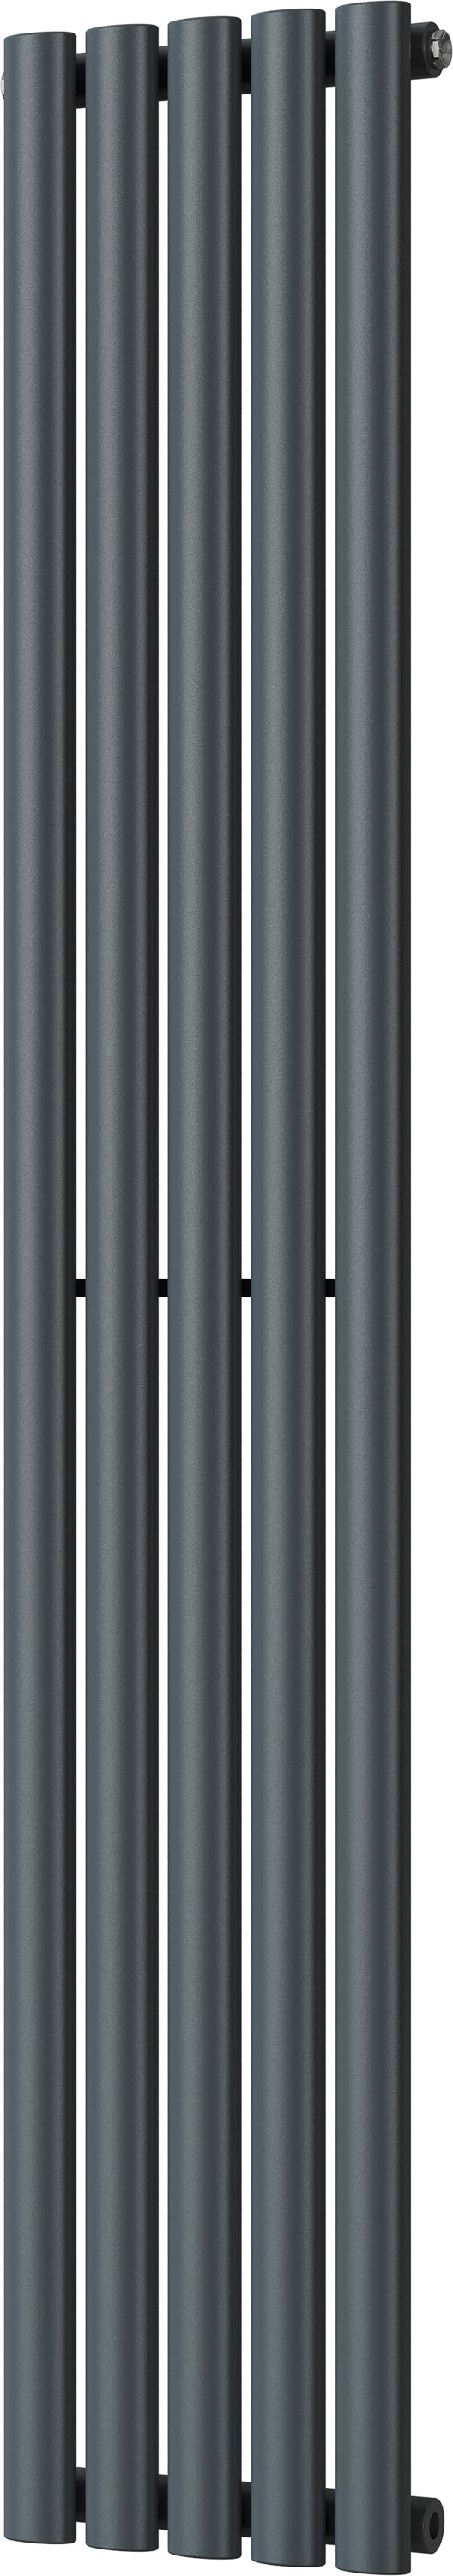 Omeara - Anthracite Vertical Radiator H1600mm x W290mm Single Panel